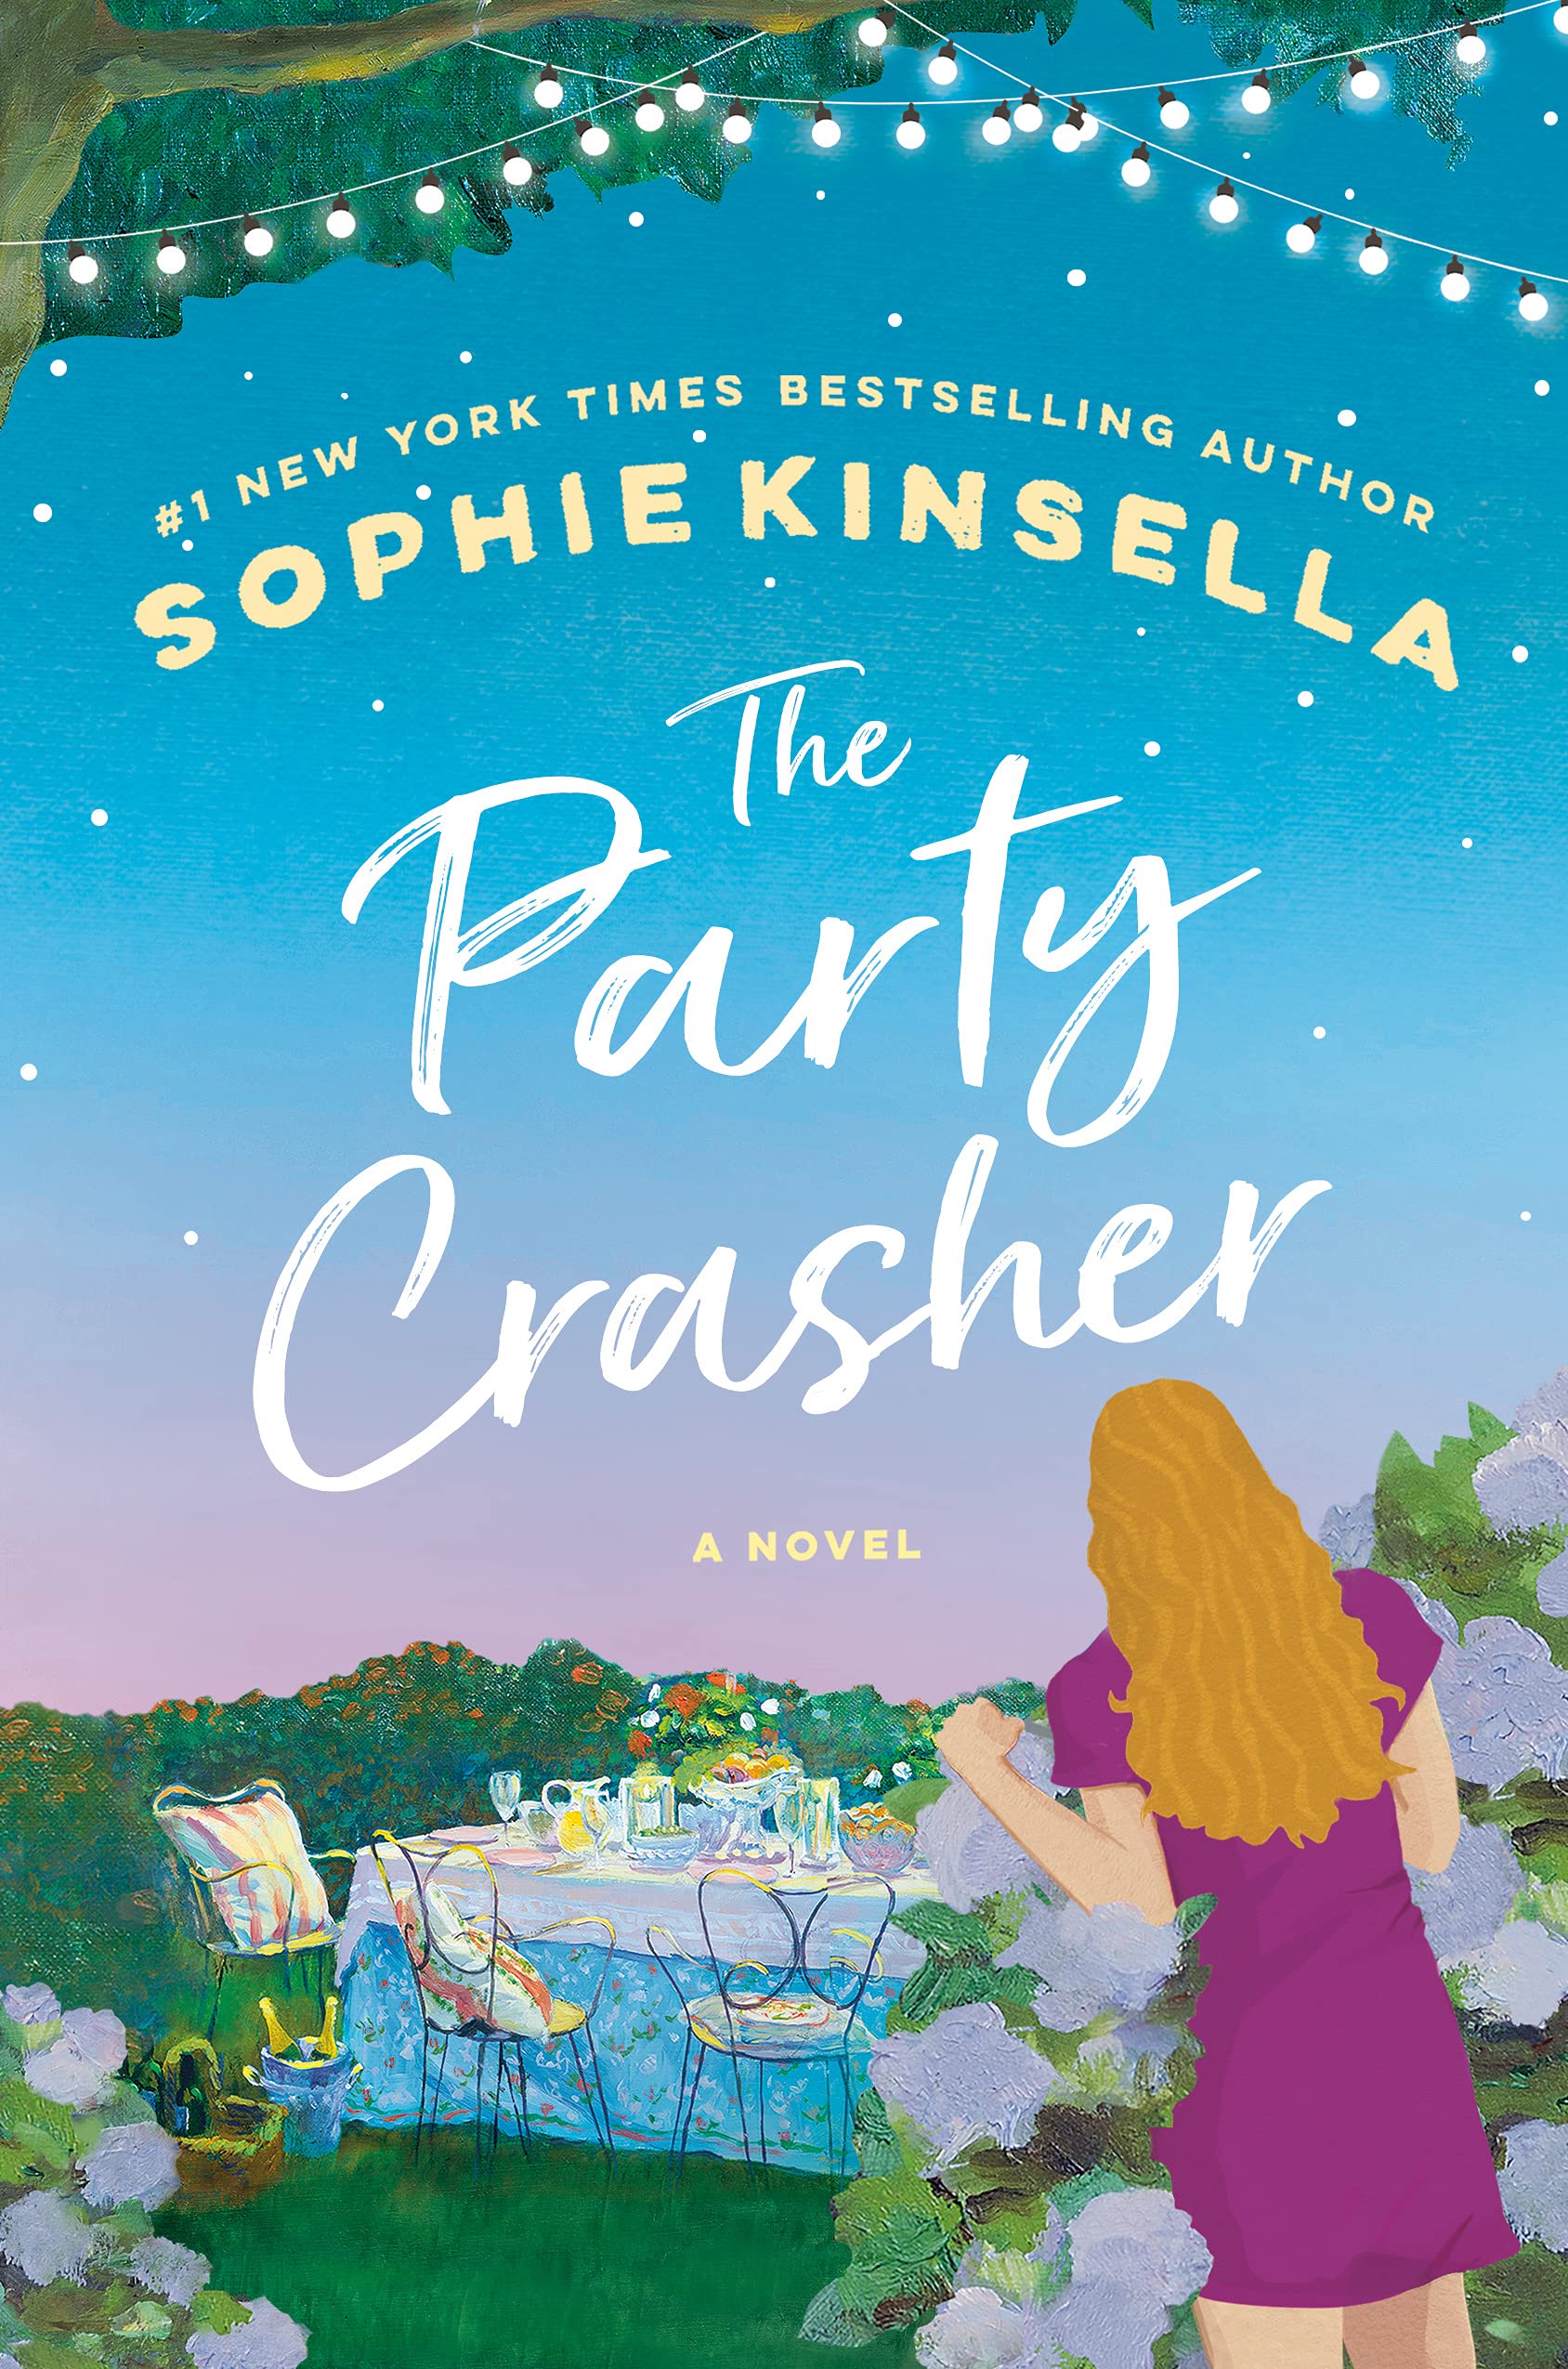 the party crasher by Sophie kinsella